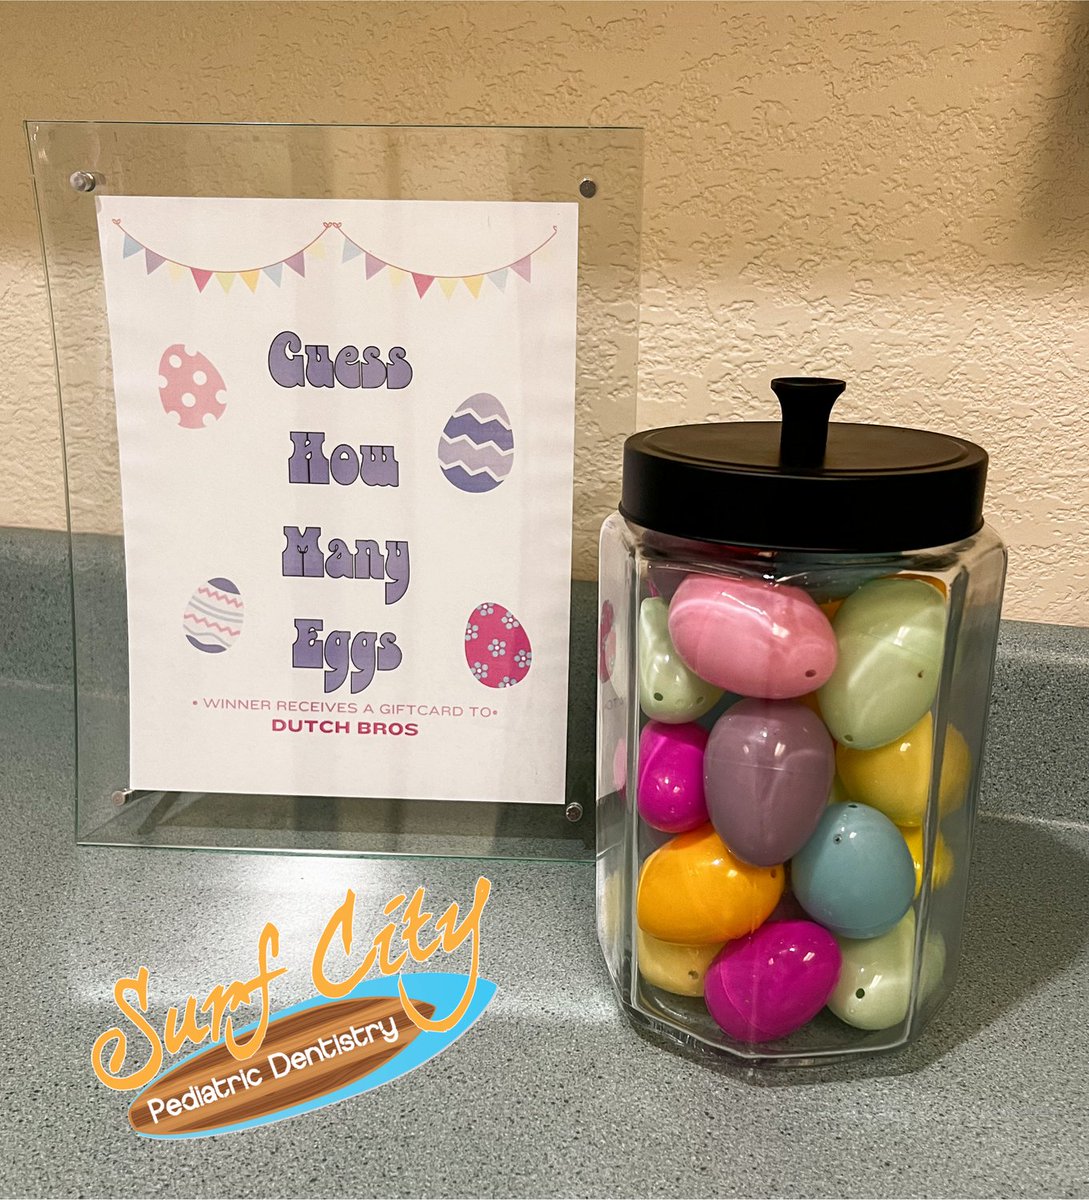 🚨March Contest Alert 🚨 Schedule your appointment in March and guess how many eggs are in the jar! Winner will receive a gift card to Dutch Bros🐣